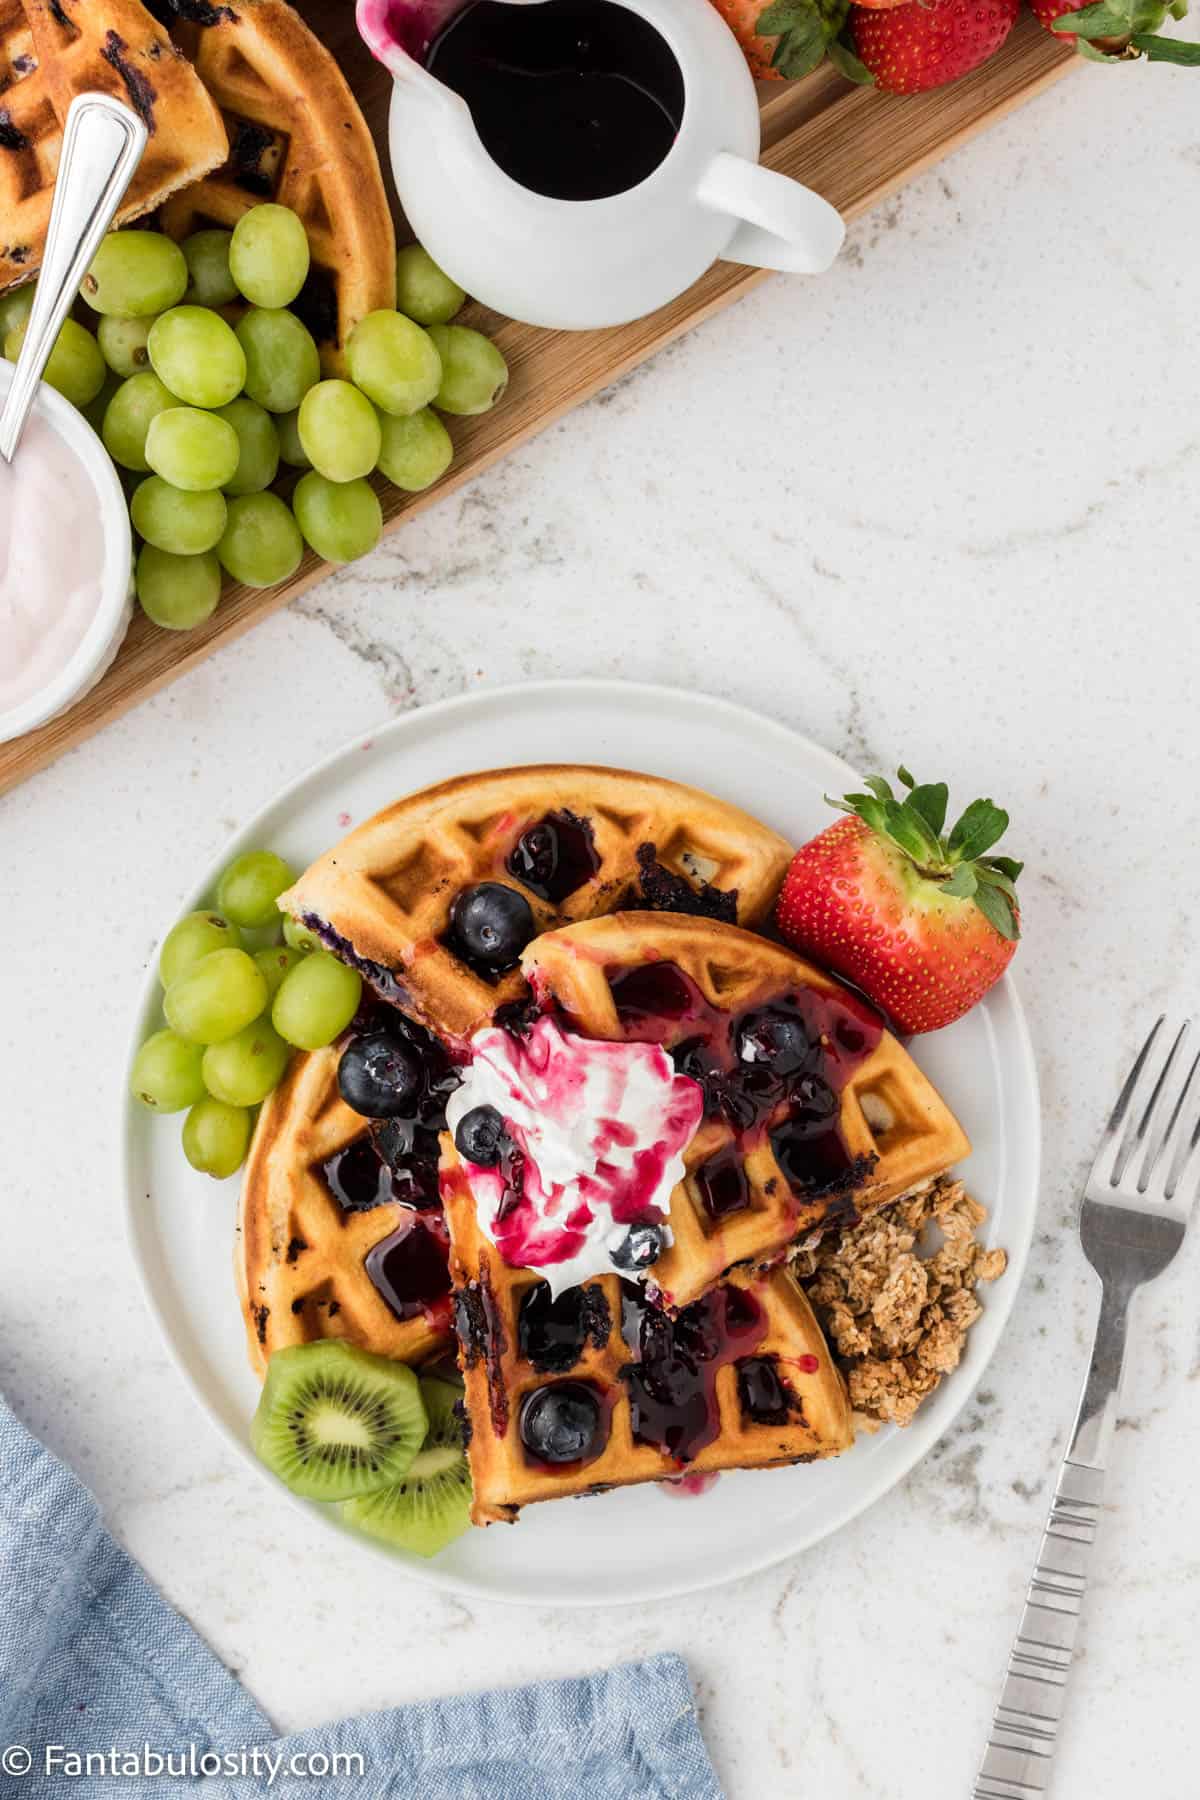 Waffles with yummy toppings and fruit on a plate.